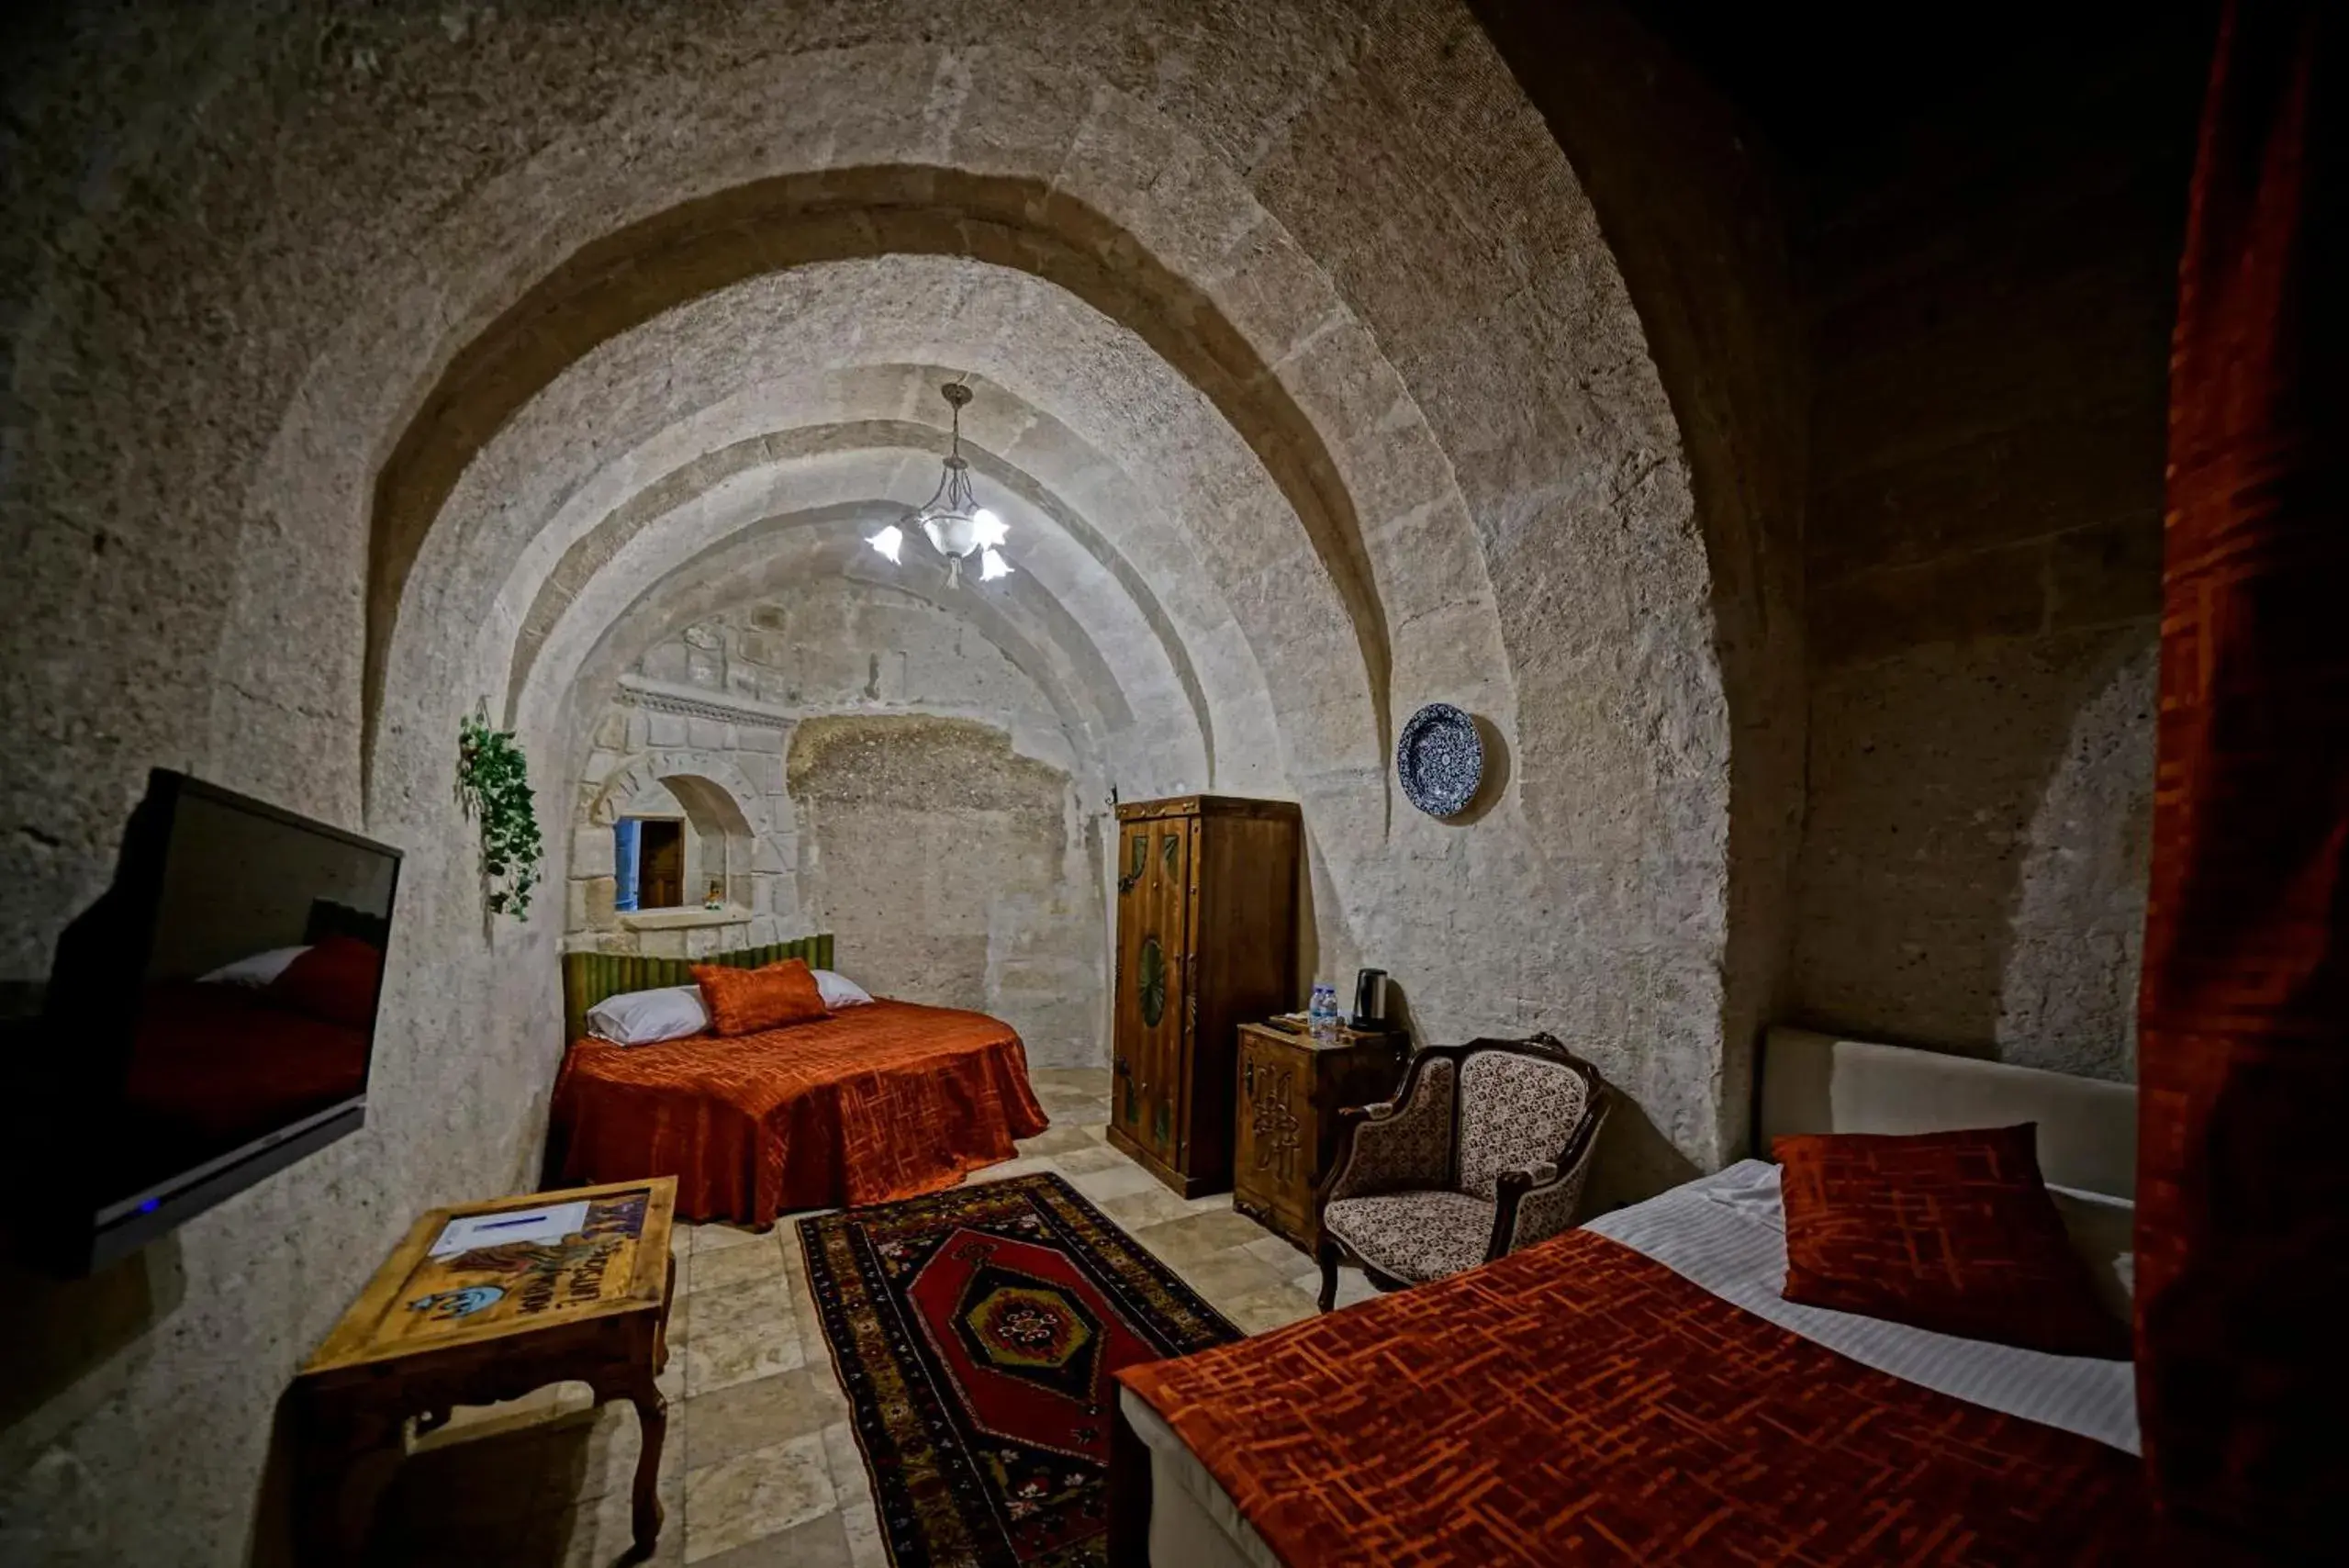 Bed in Holiday Cave Hotel